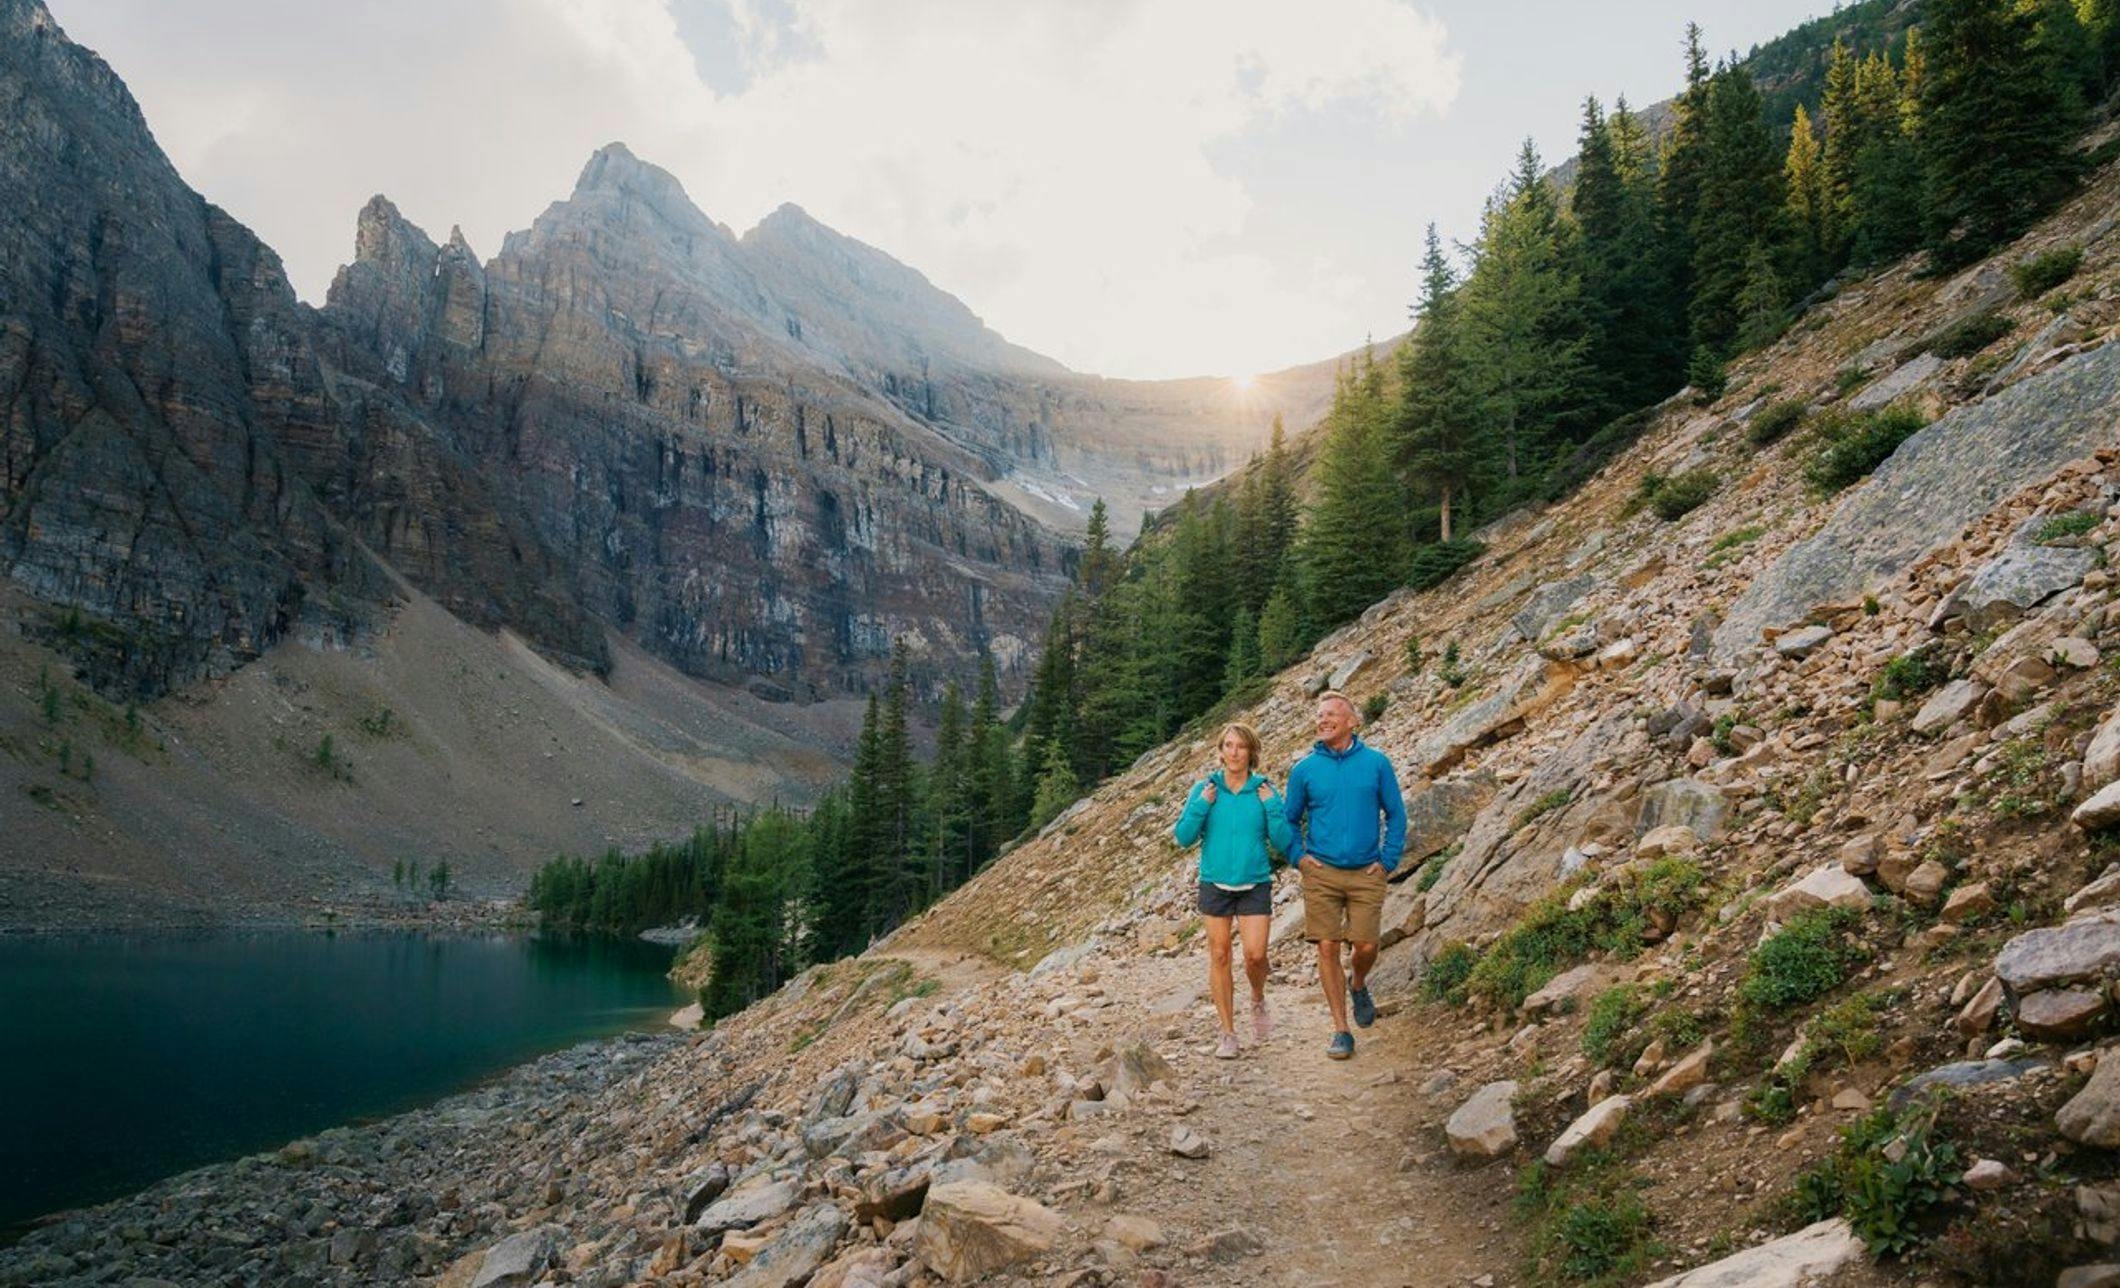 Two people hike a trail in Banff National Park in the Canadian Rockies.